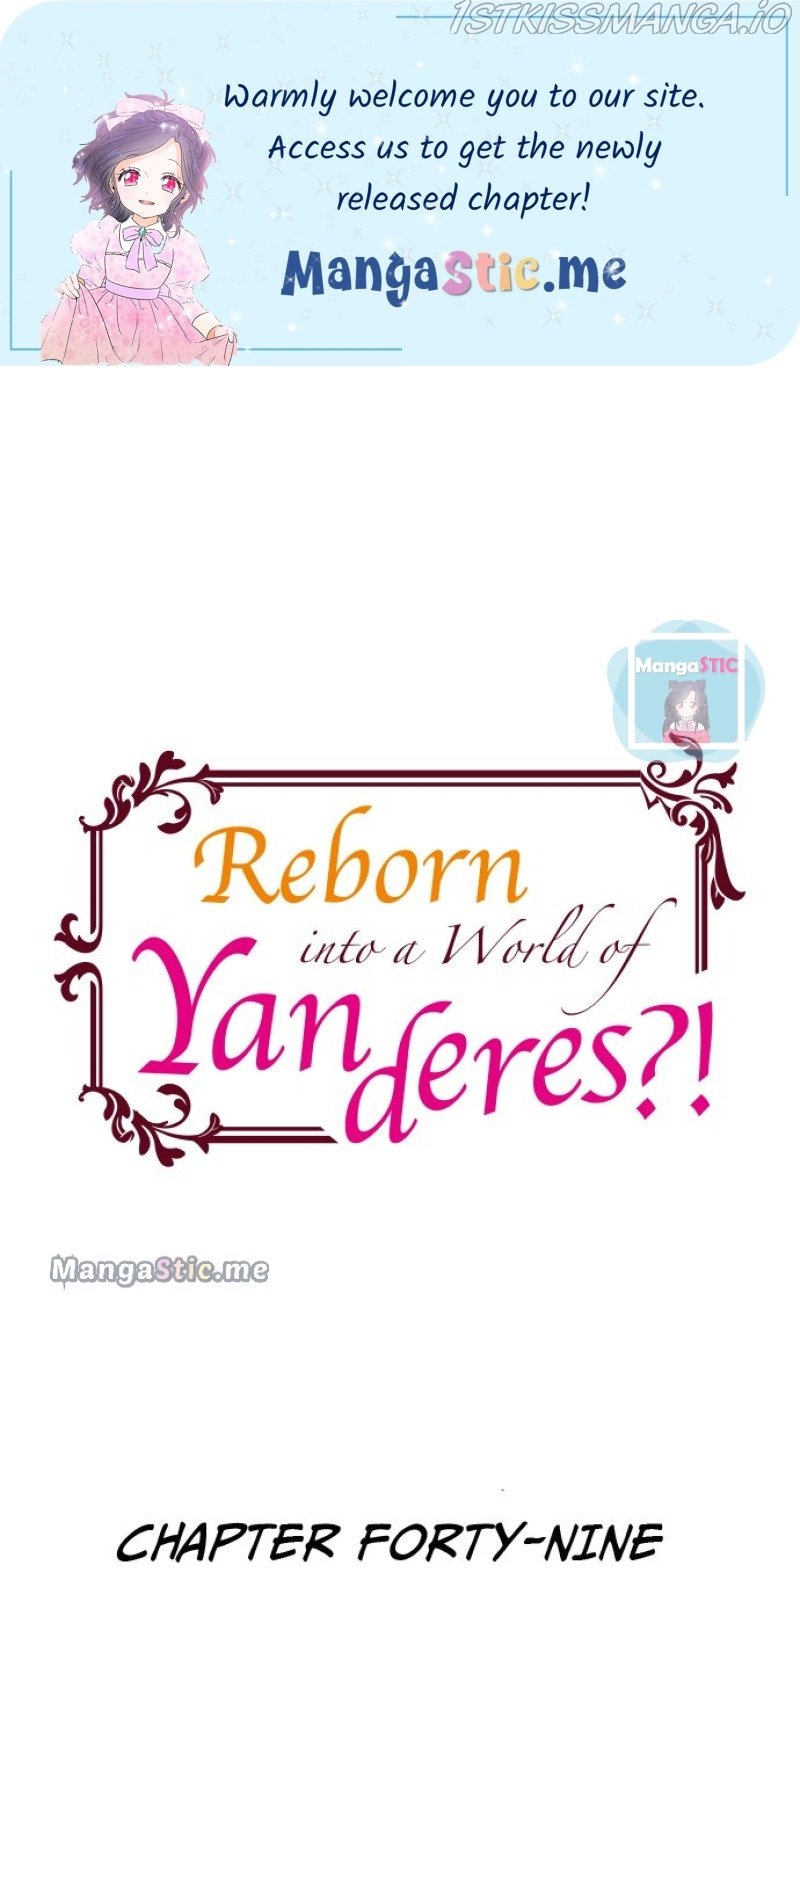 Reborn into a World of Yanderes?! chapter 49